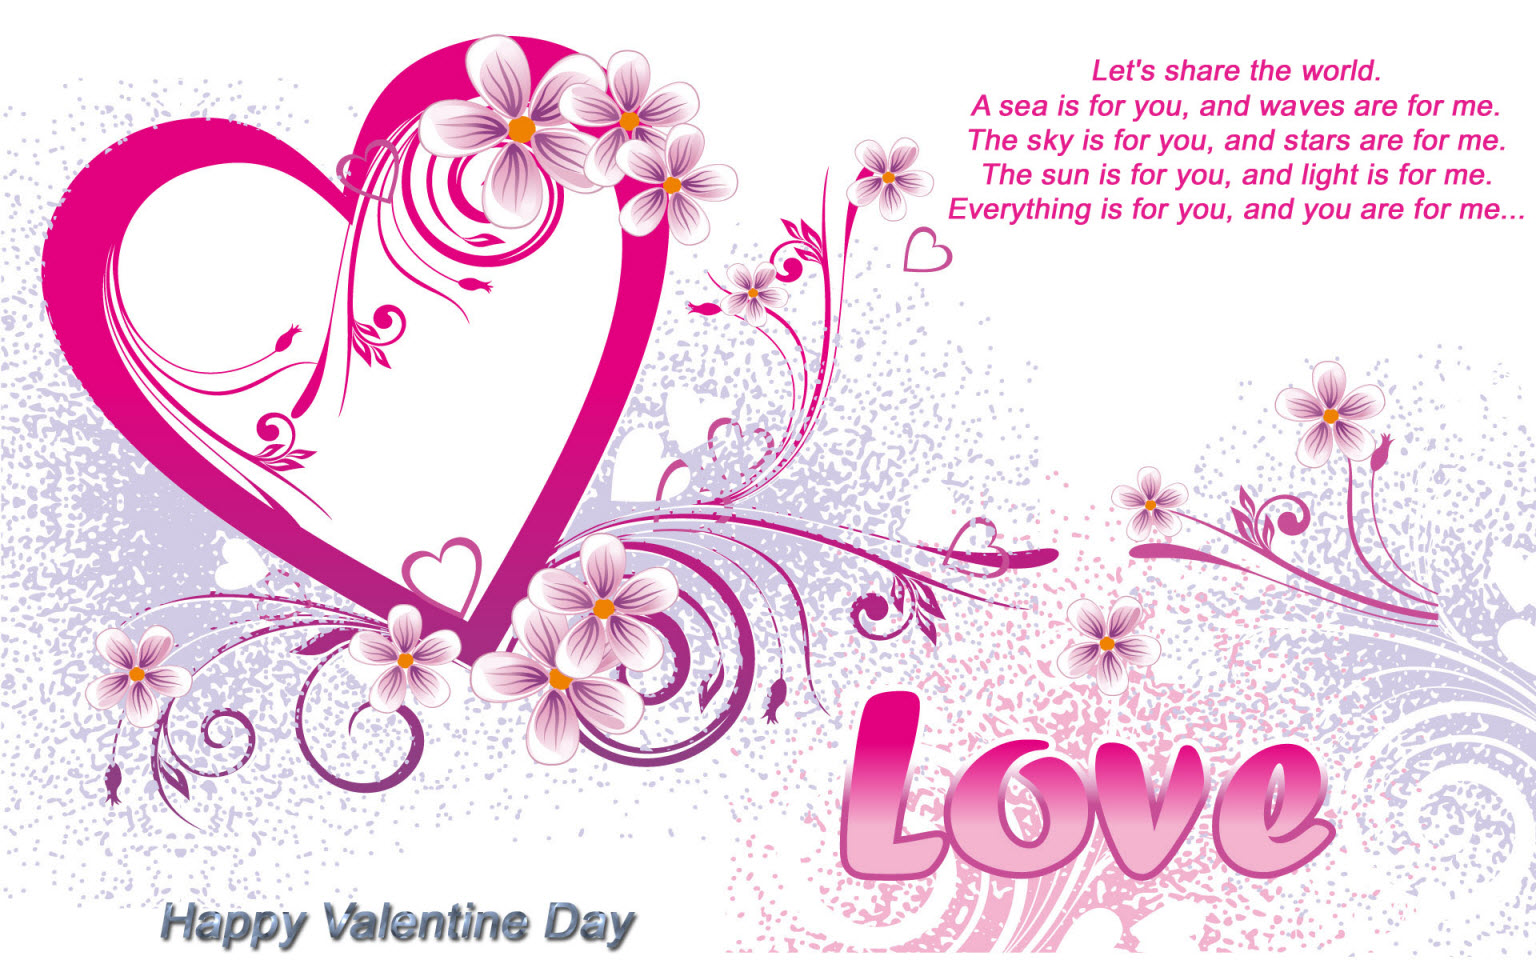 Happy Valentines Day HD Wallpaper, Images, Greetings 2013